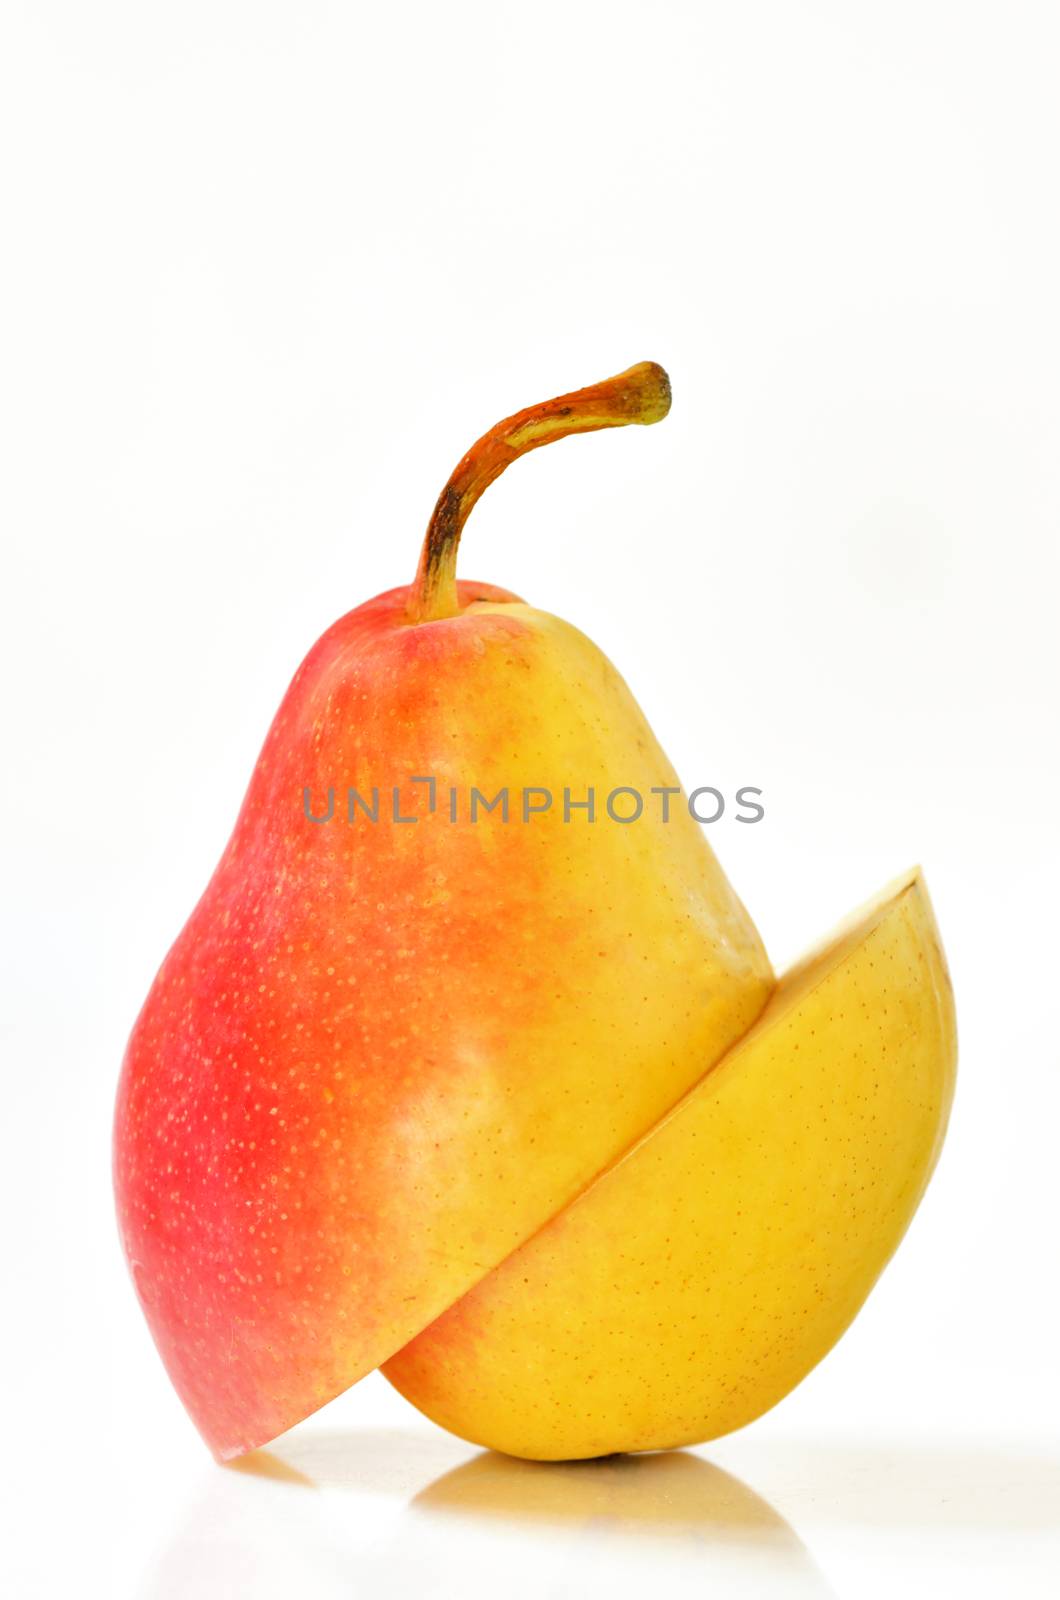 Abstract sliced pear on white background